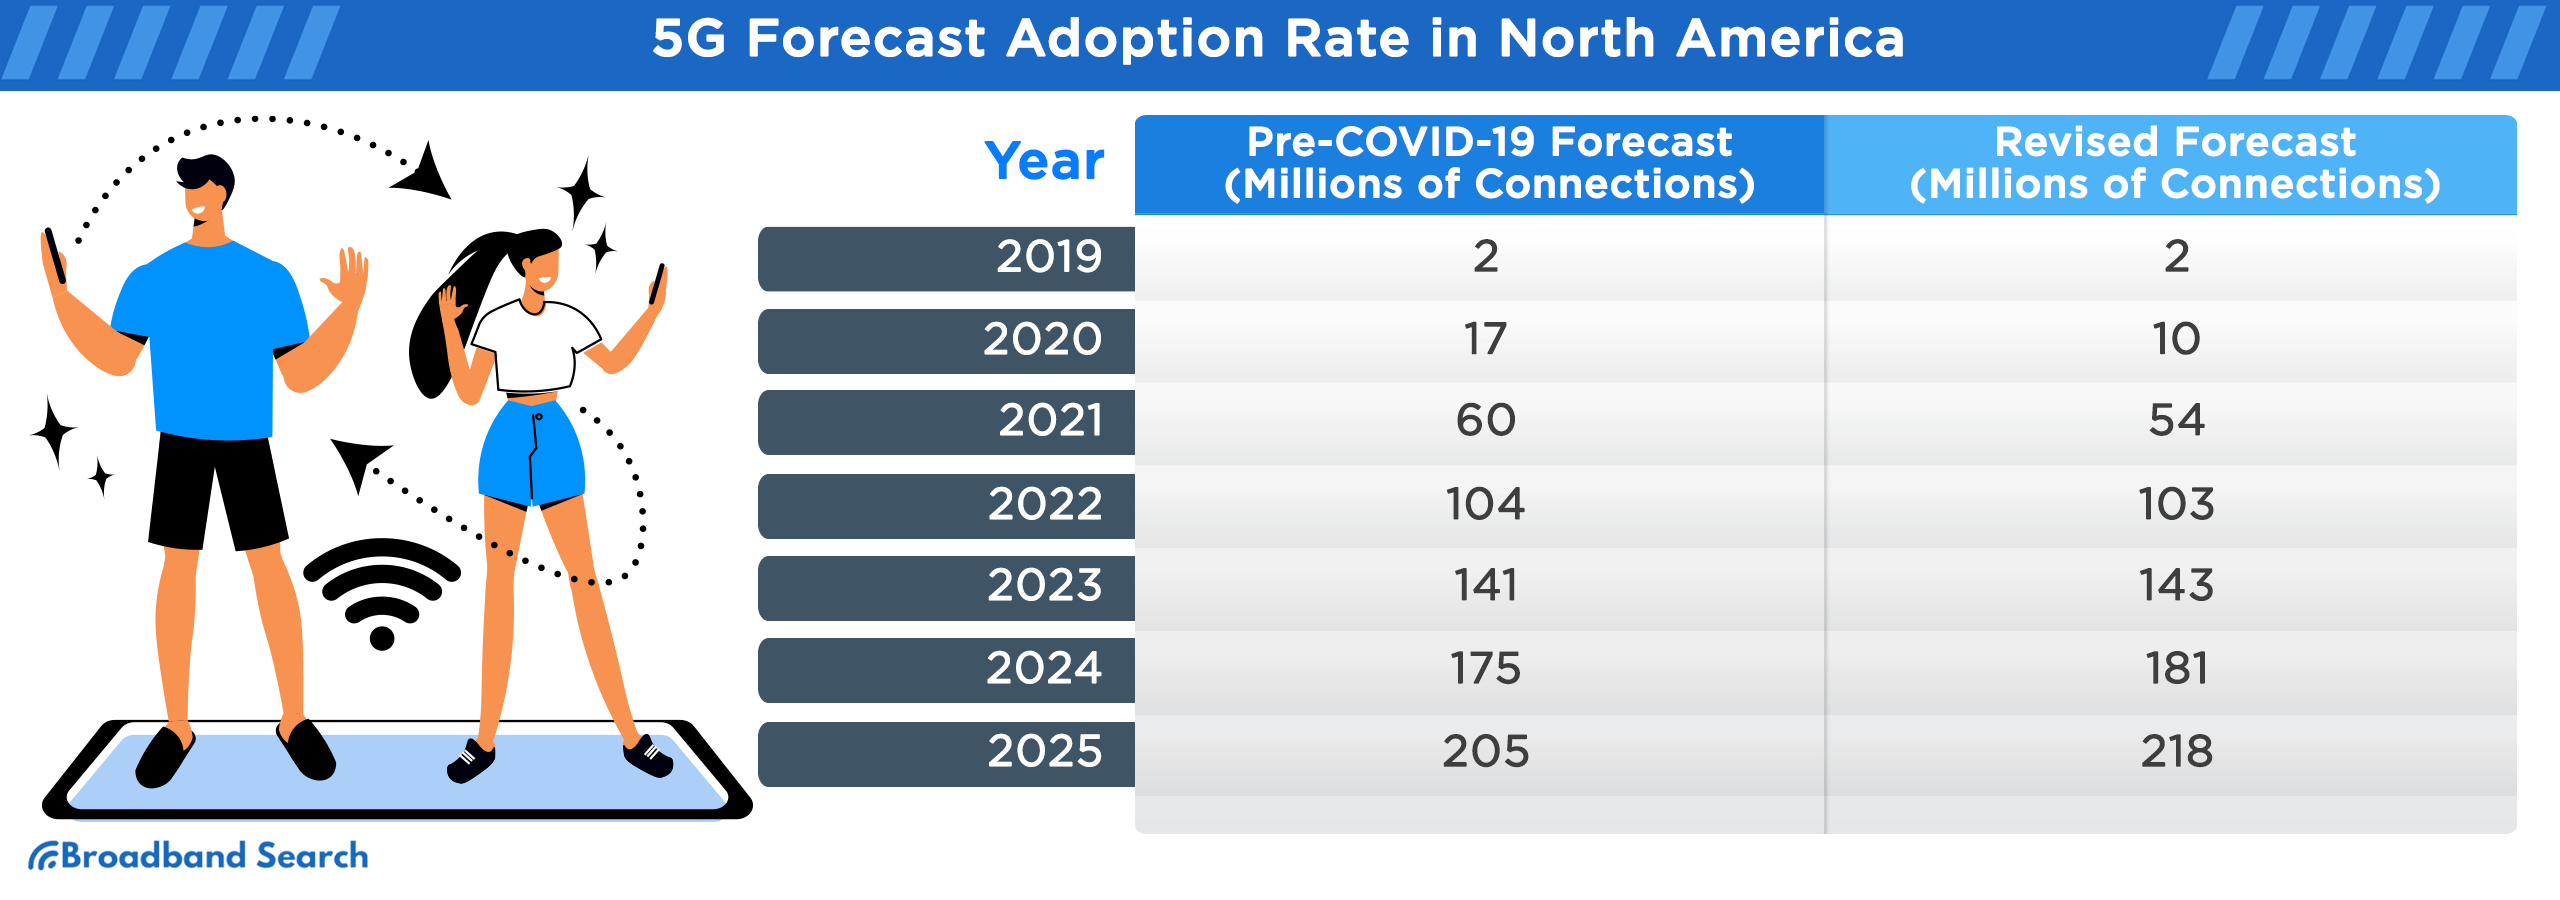 5G Forecast adoption rate in North America